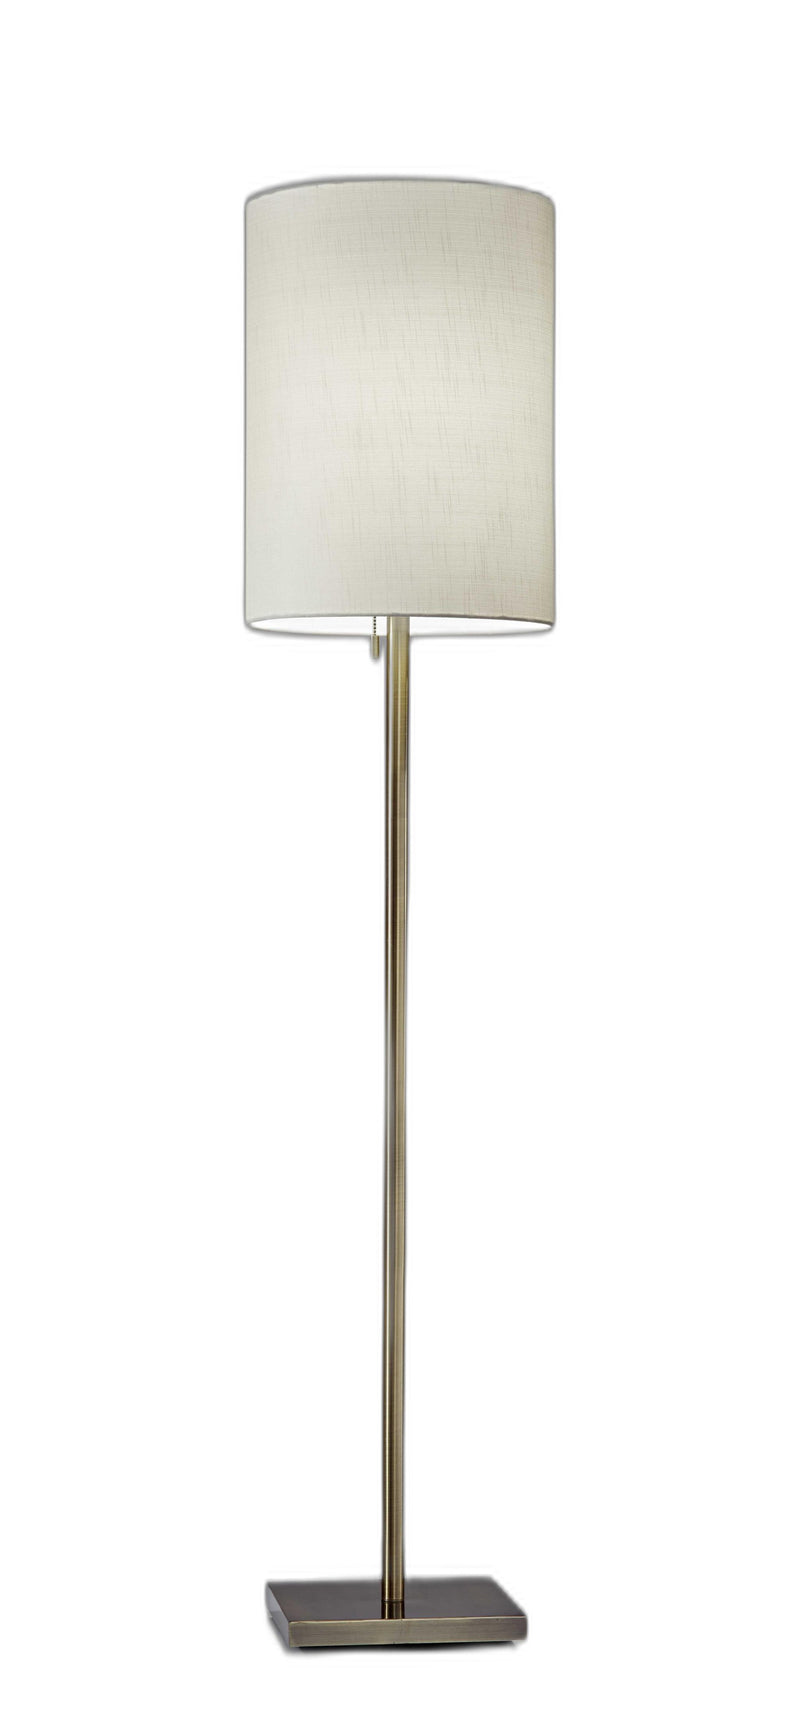 Home Outfitters Floor Lamp Classic Silhouette Brass Metal